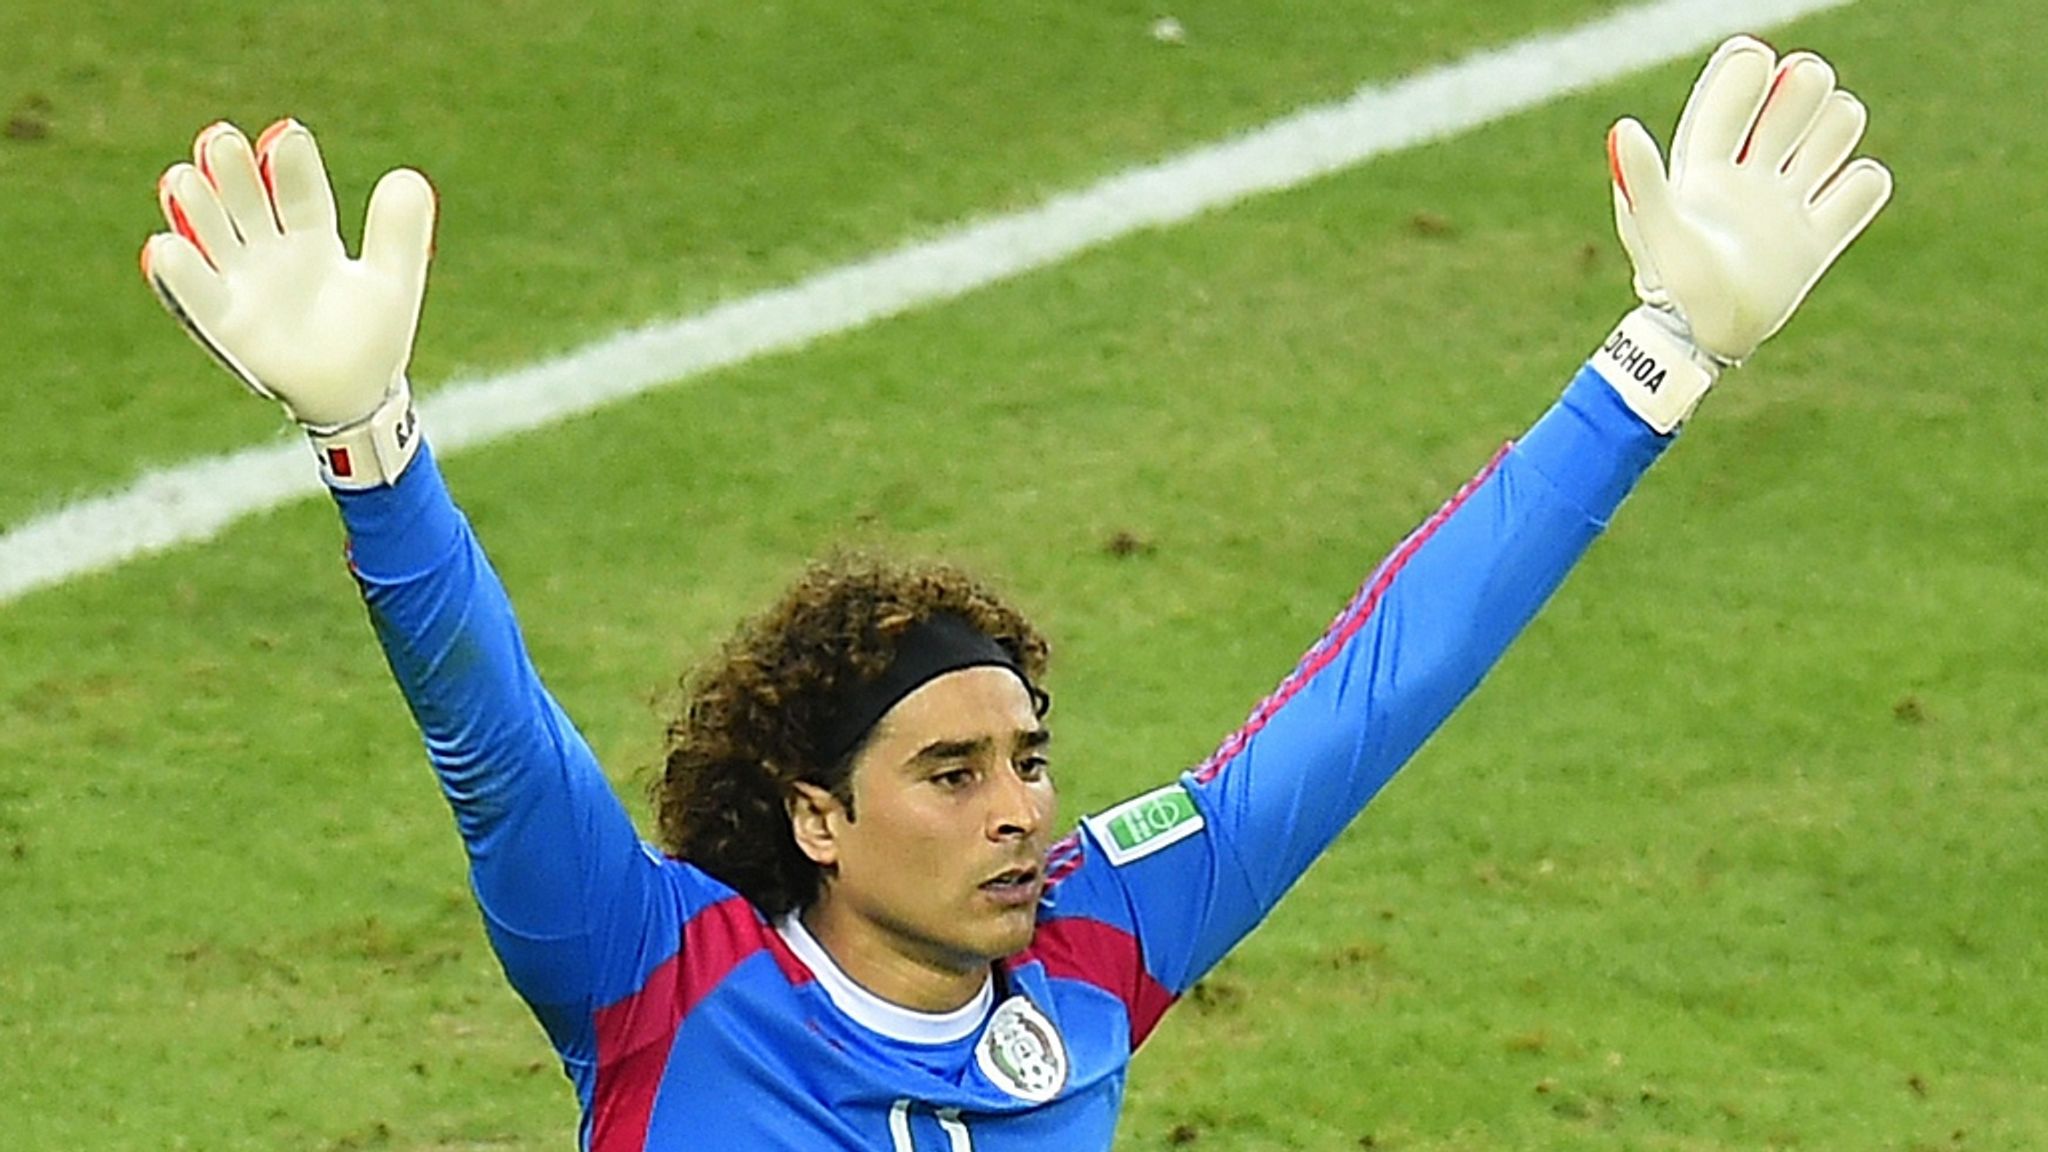 96 Guillermo Ochoa on afari iPhone 11 Wallpapers Free Download